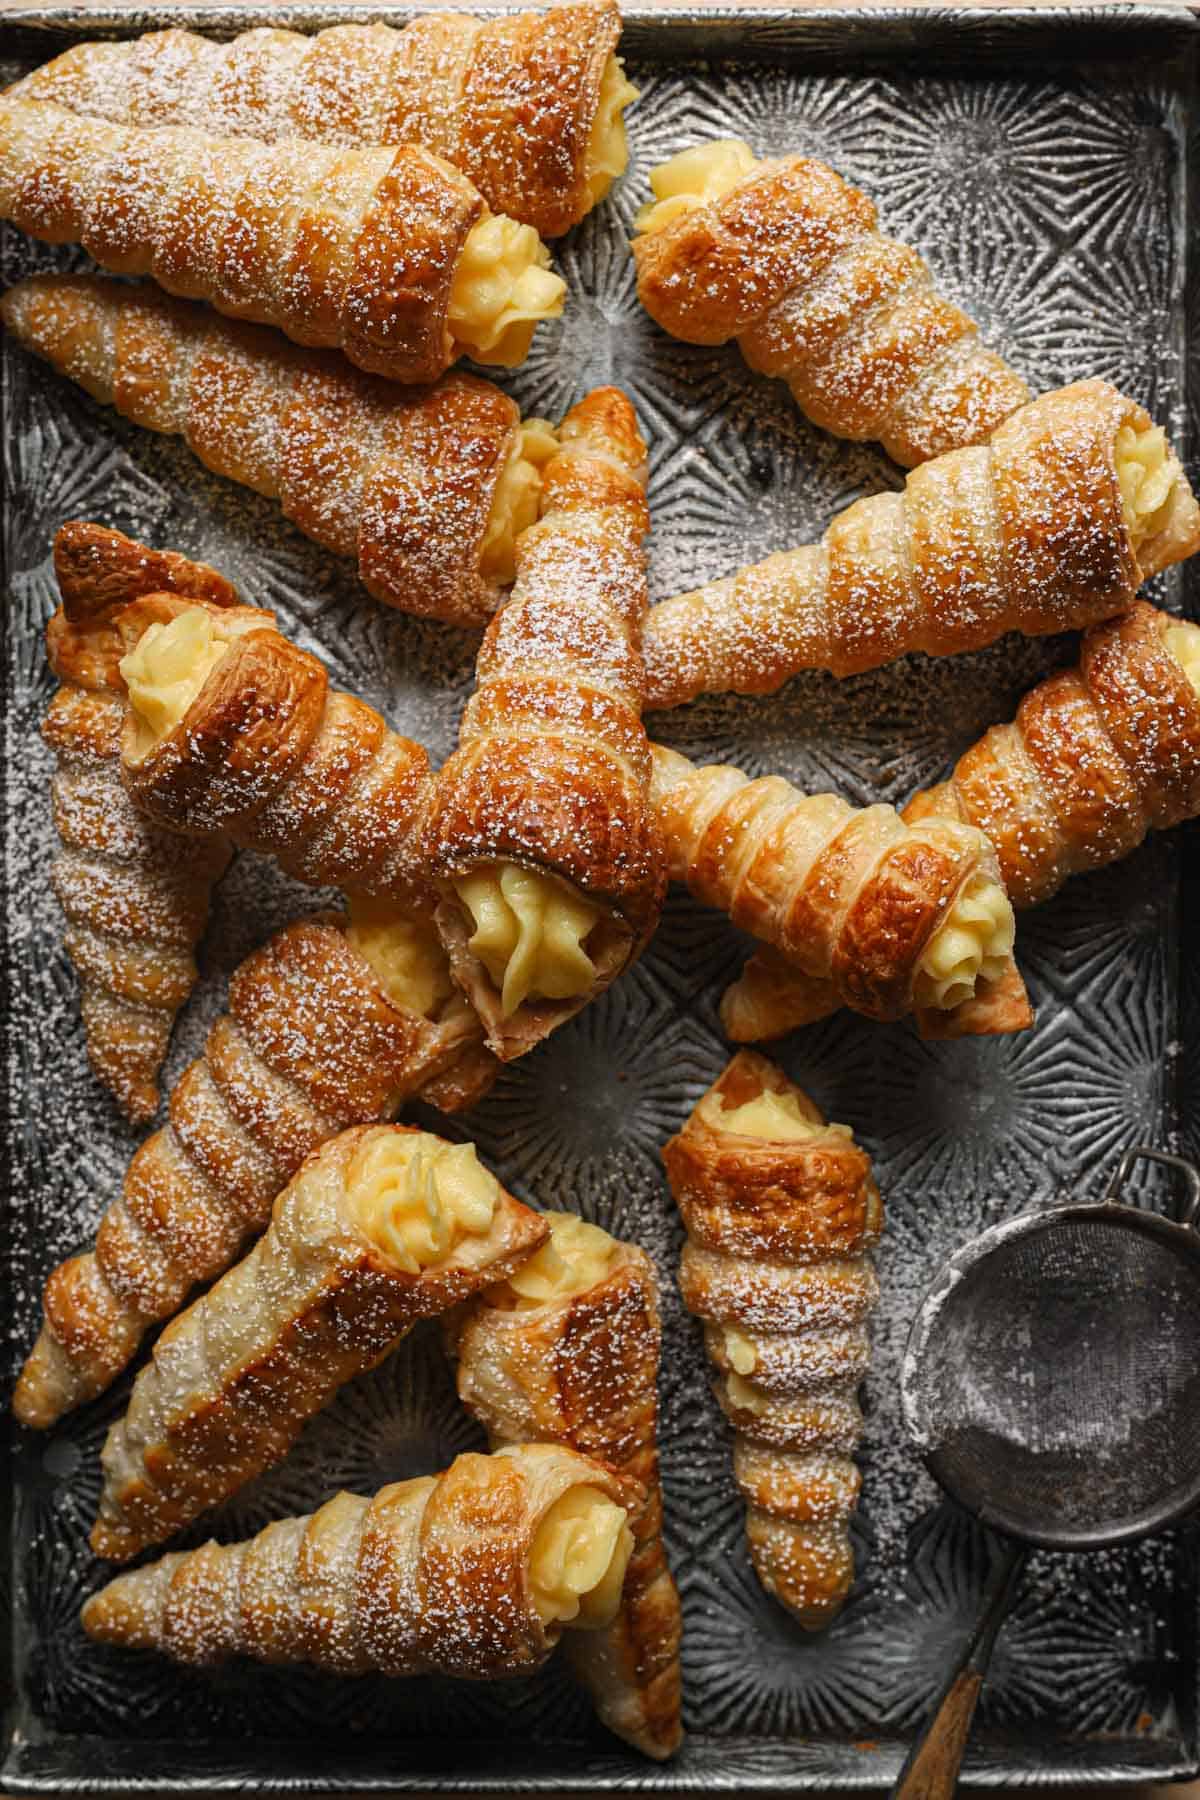 Cannoncini pastries